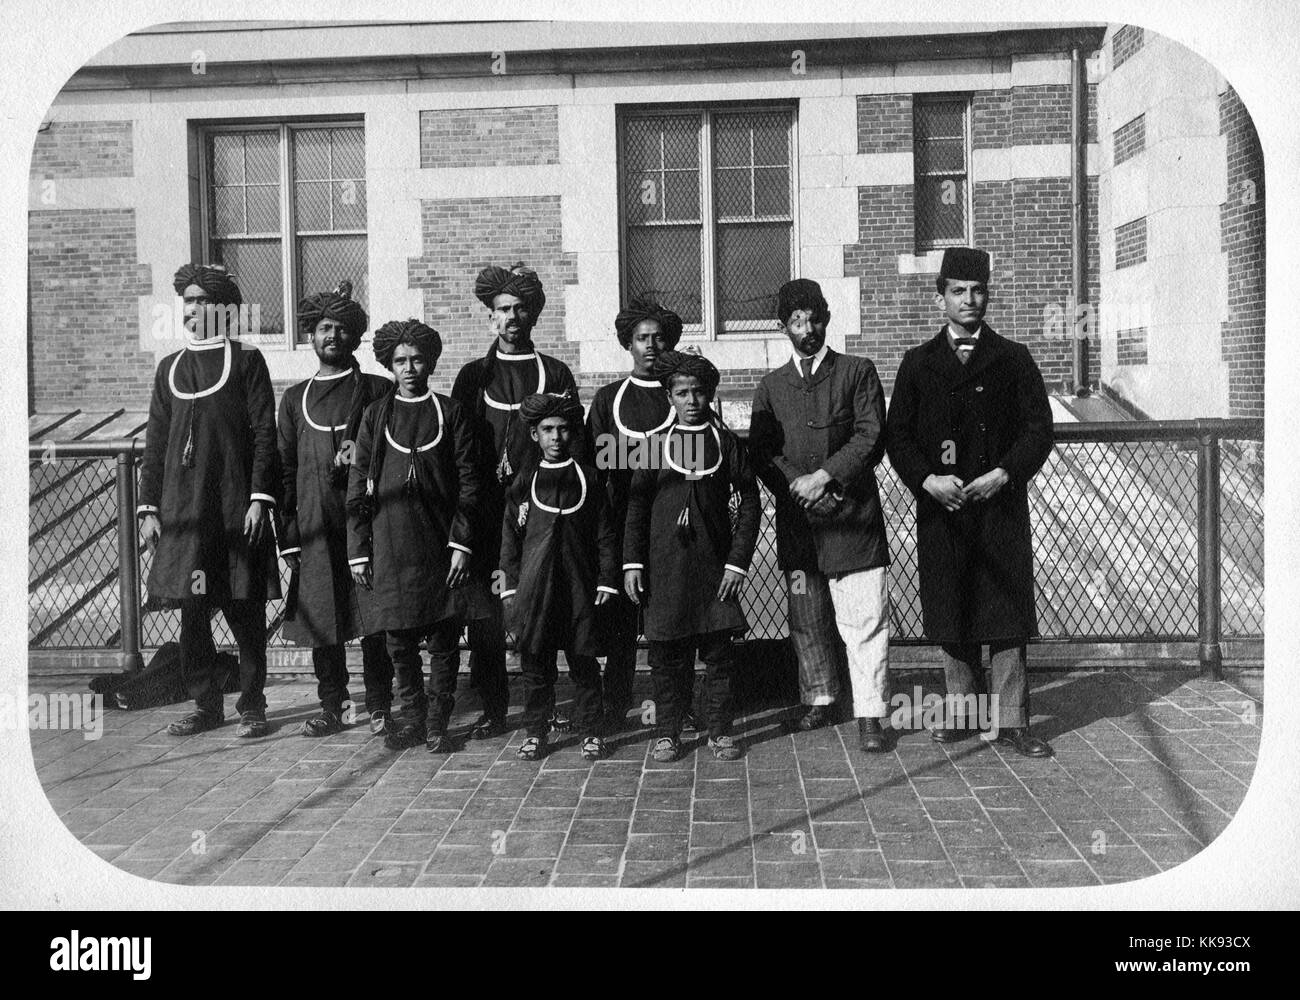 A photograph of a group of immigrants that have arrived on Ellis Island, the majority of the group are wearing long, robe-like tops and turbans, the two men on the right wear jackets and fezzes, New York, 1907. From the New York Public Library. Stock Photo